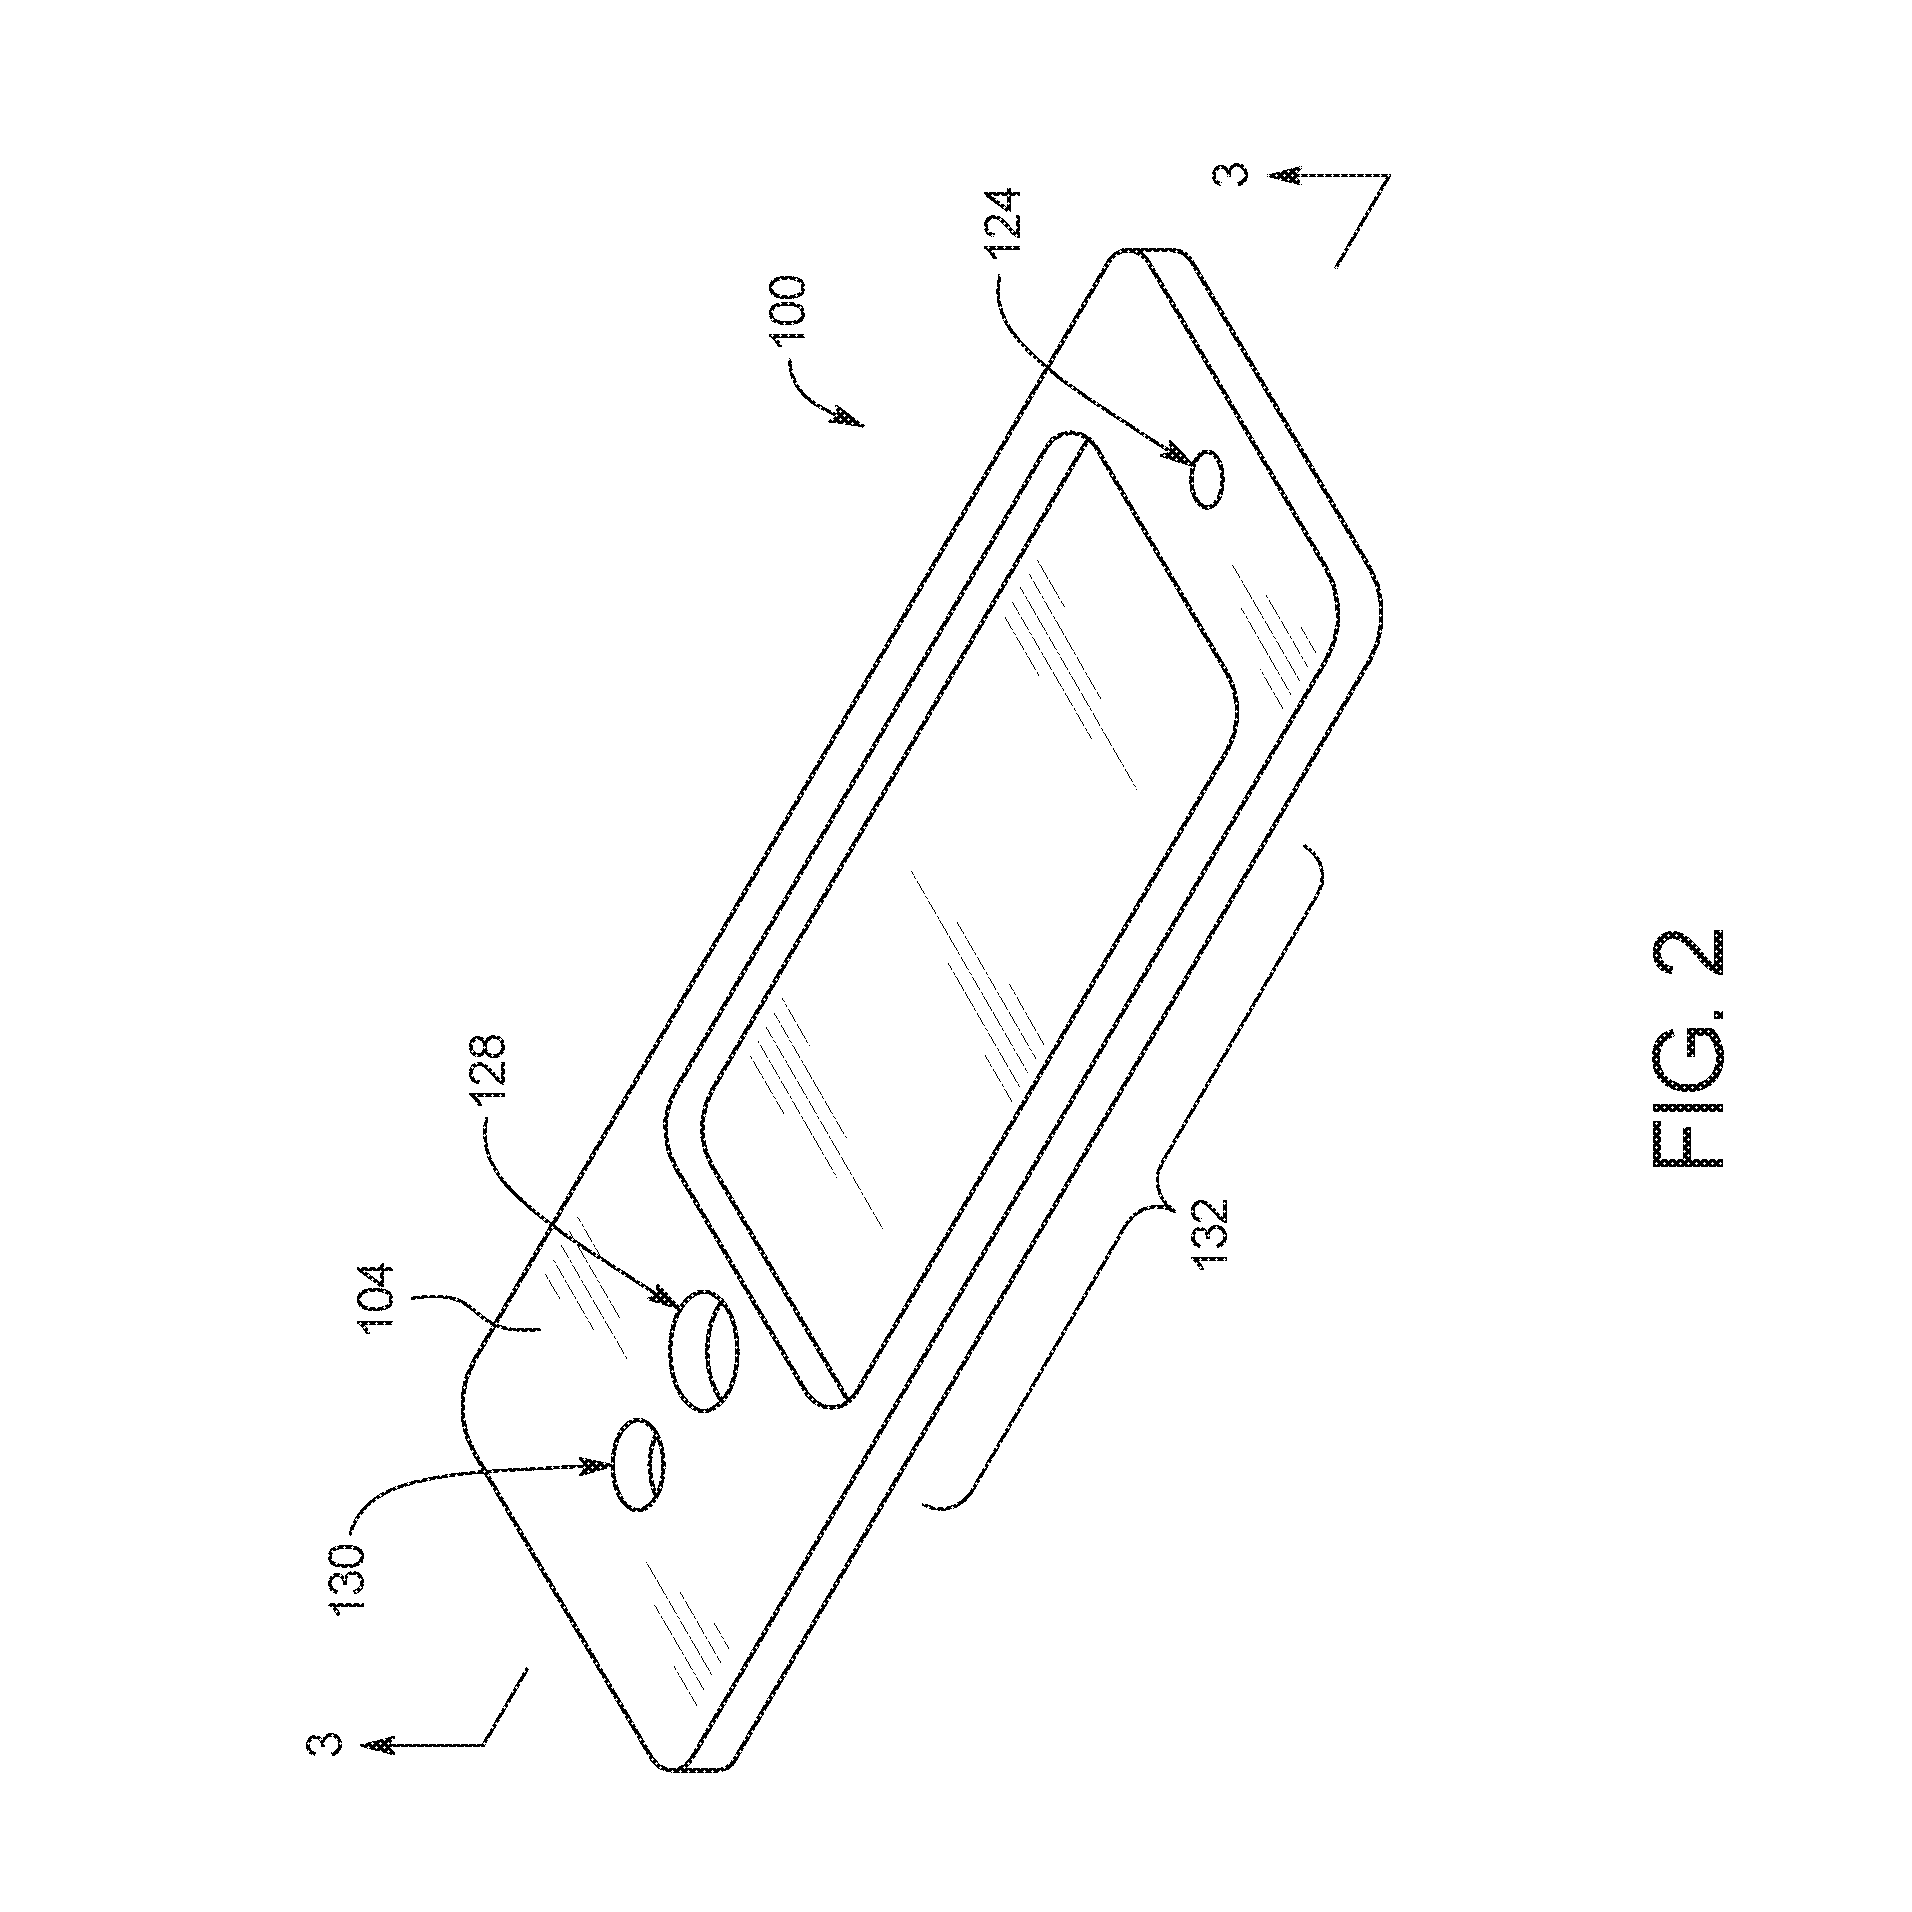 Camera imaging system for a fluid sample assay and method of using same